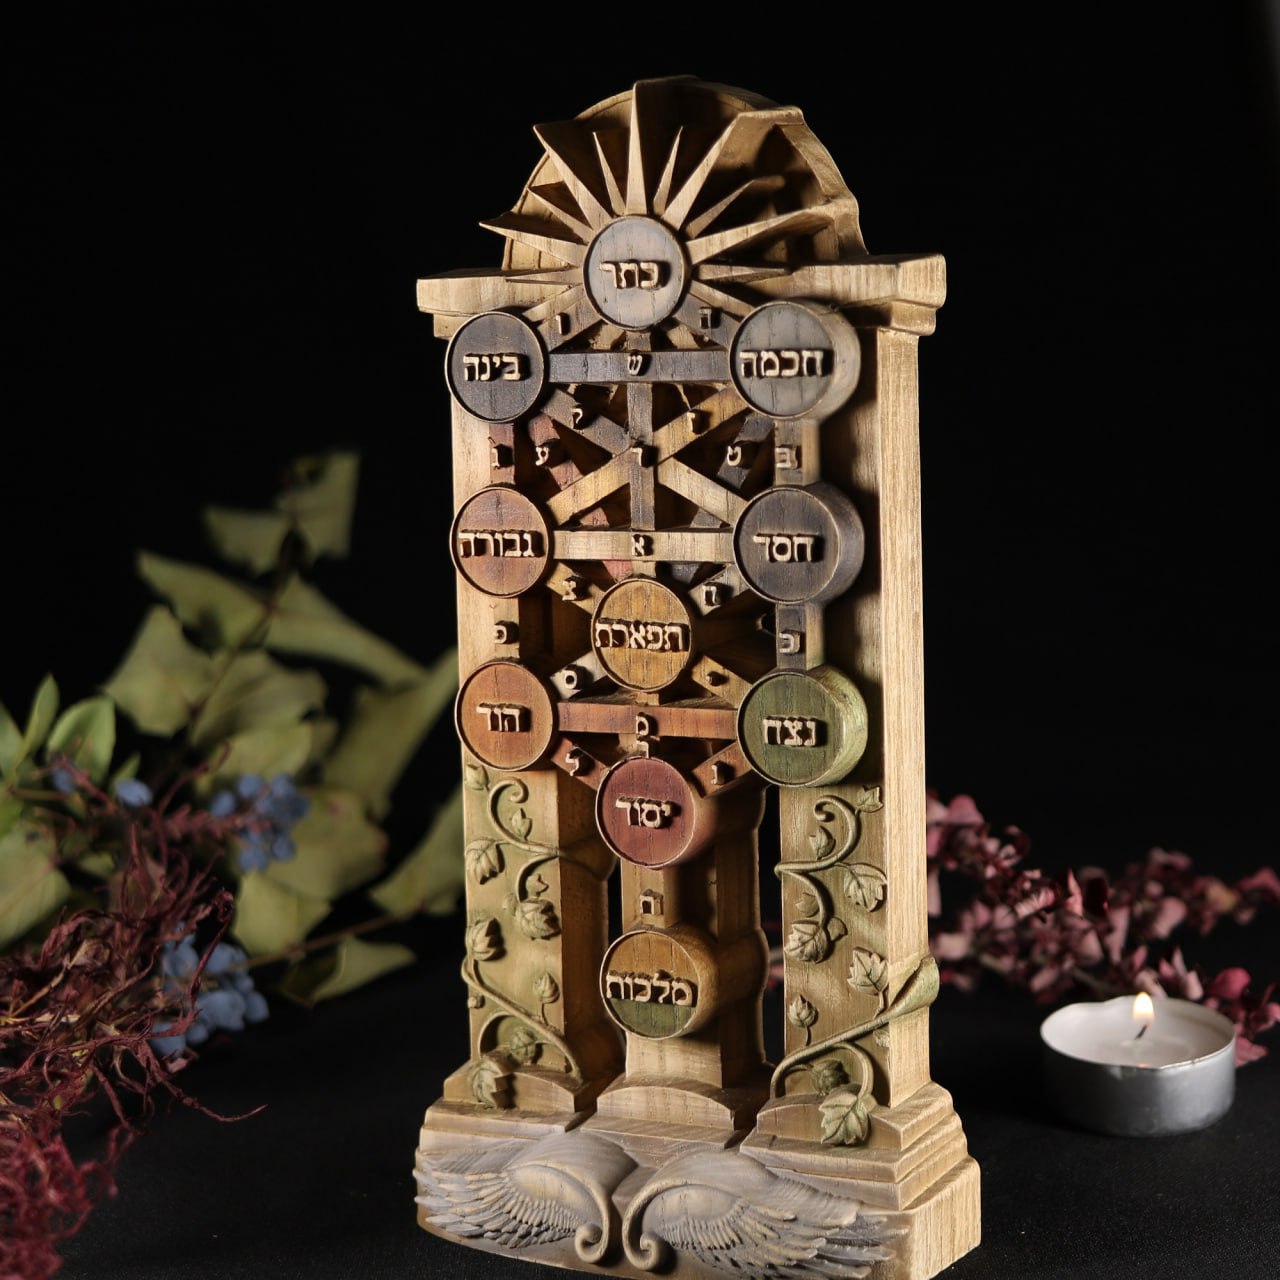 Enchanting Wooden Carved Tree of Life Sephirot: Embrace Spiritual Wisdom and Renewal